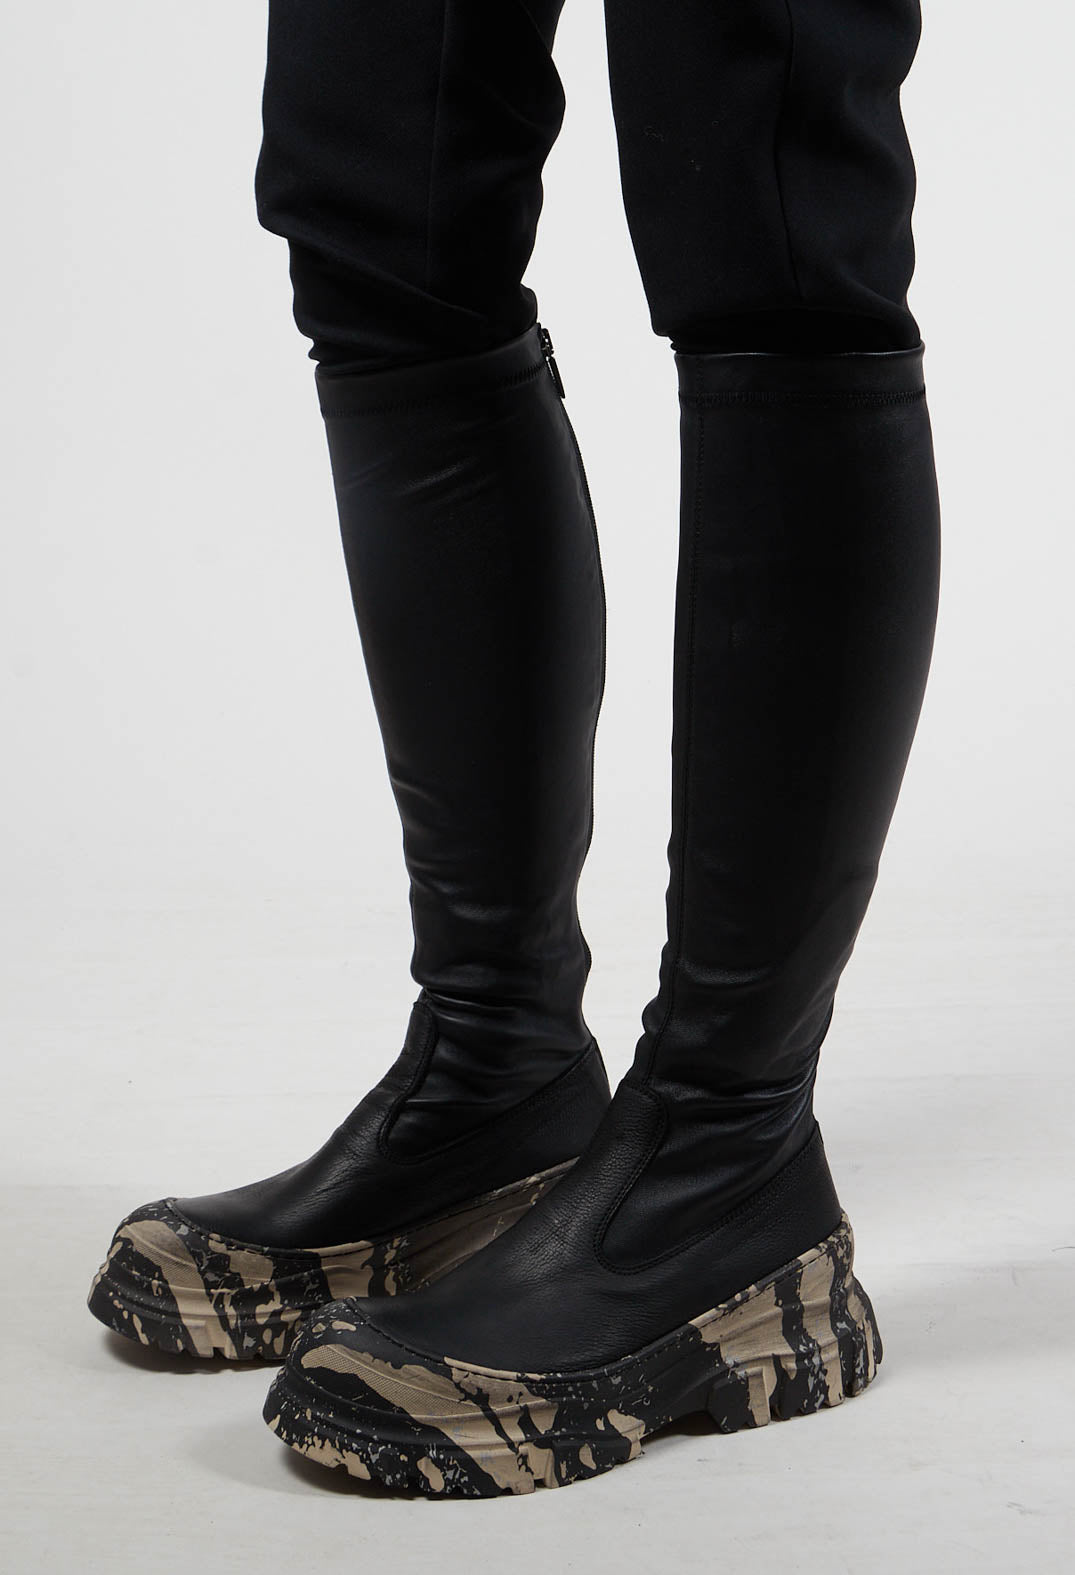 Suede Long Boots in Gasoline Nero and Nappa Stretch Nero